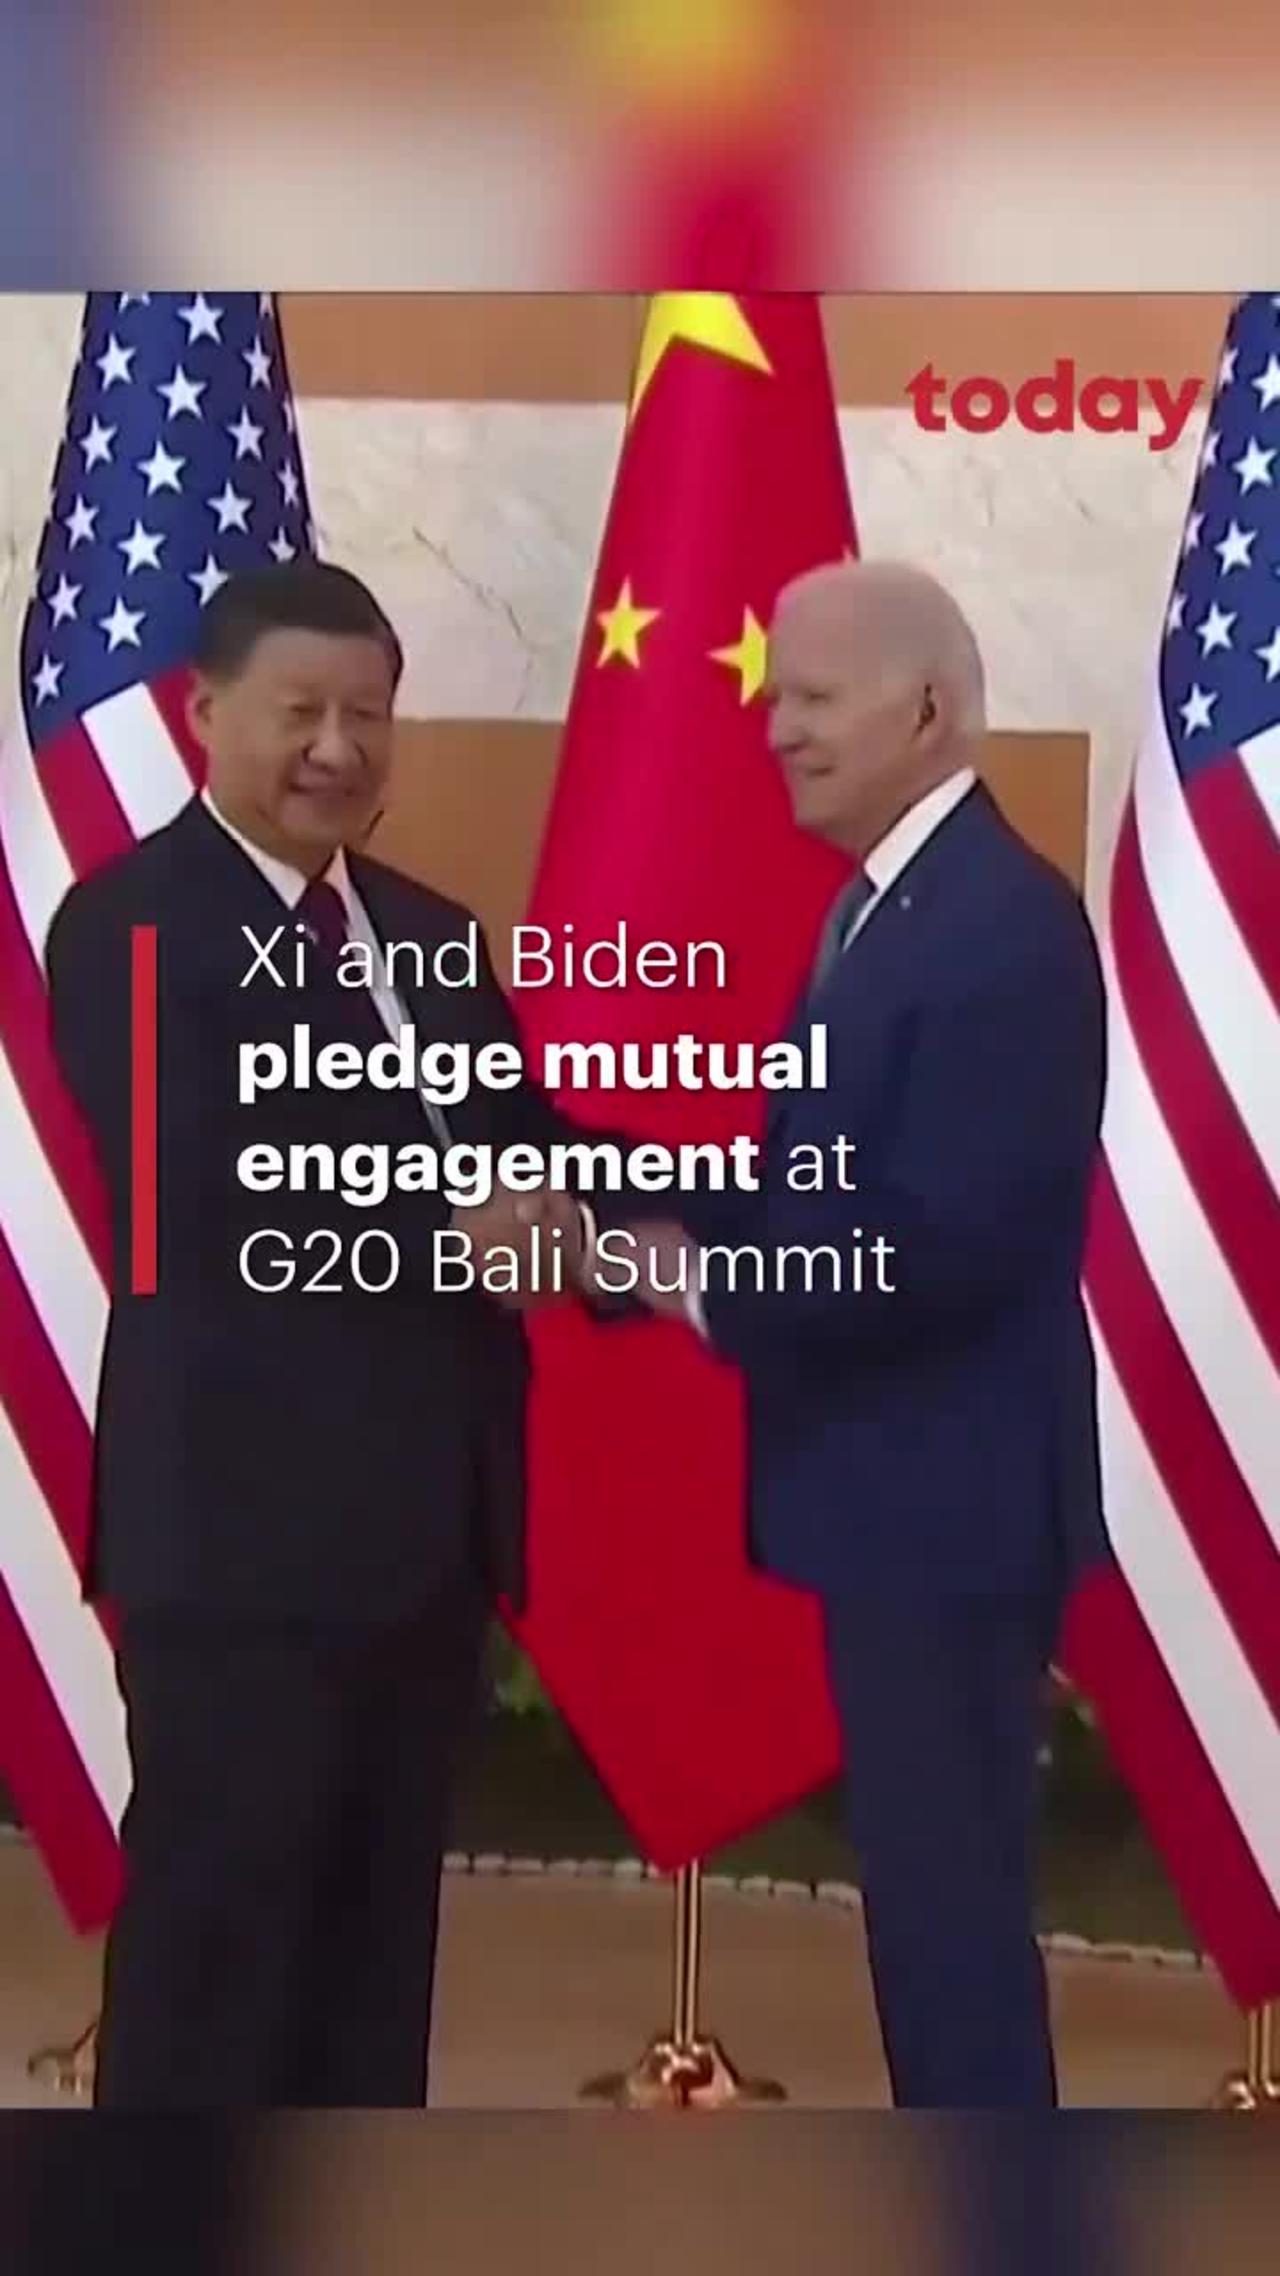 Xi and Biden pledge mutual engagement at G20 Bali Summit  TODAYonline 152K subscribers  Subscribe